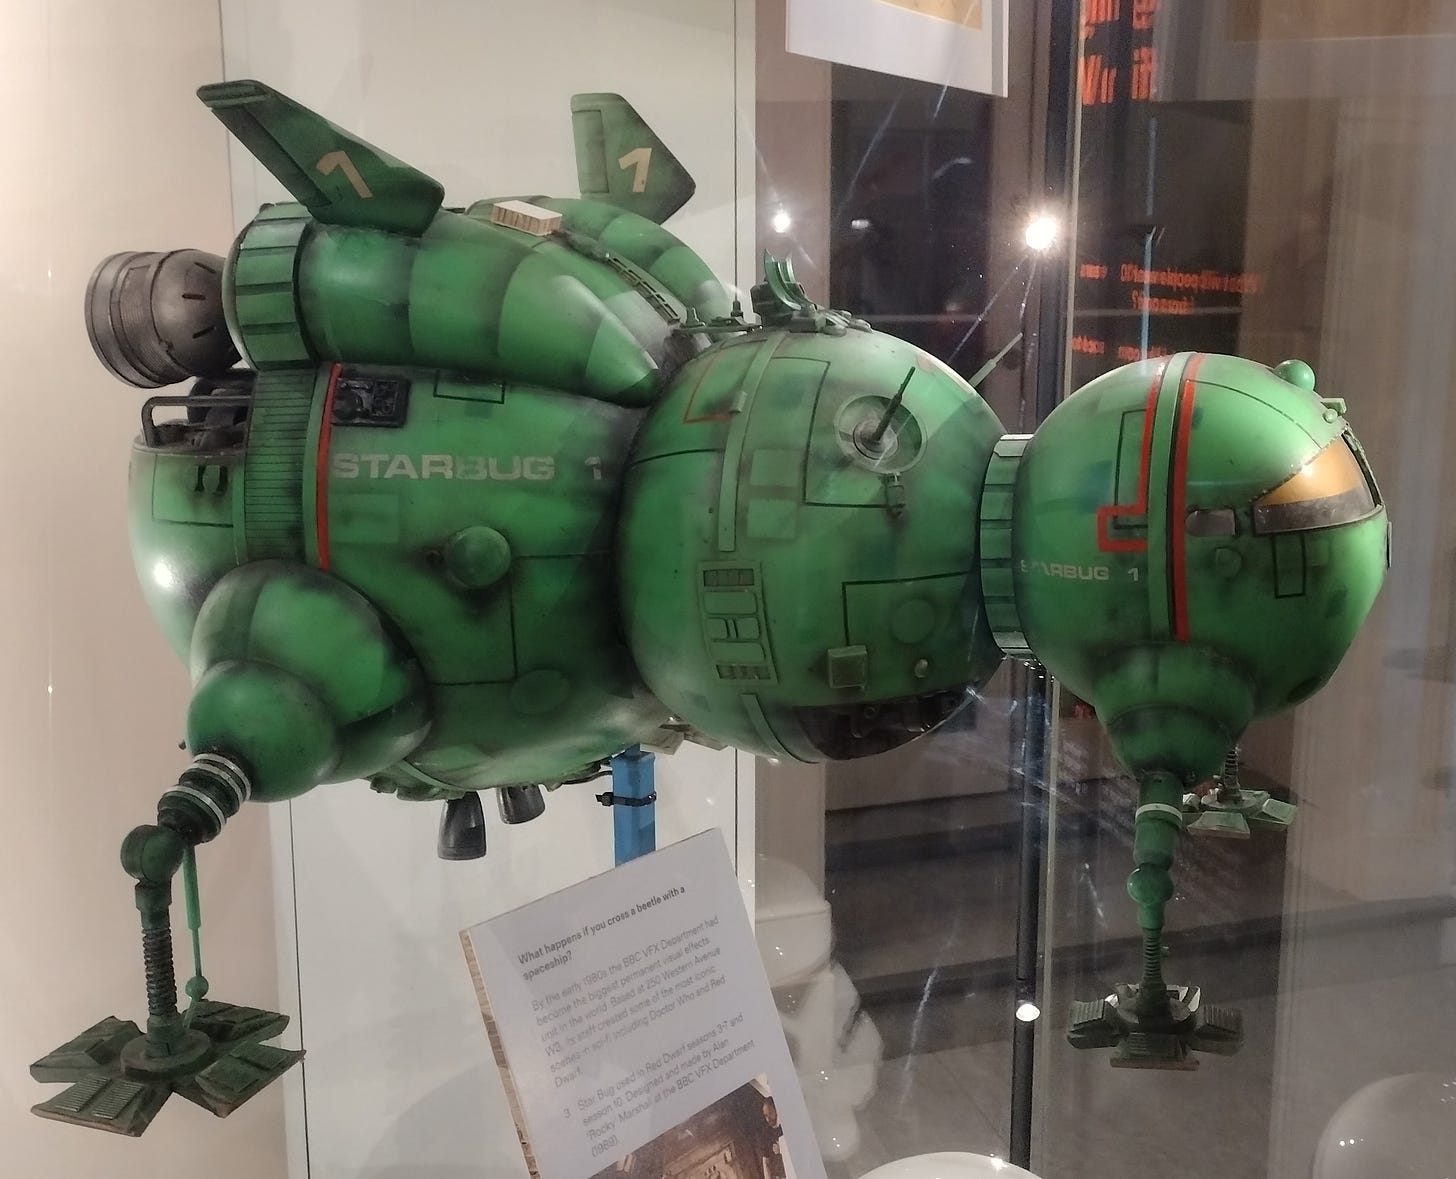 A model of the spaceship Starbug from Red Dwarf